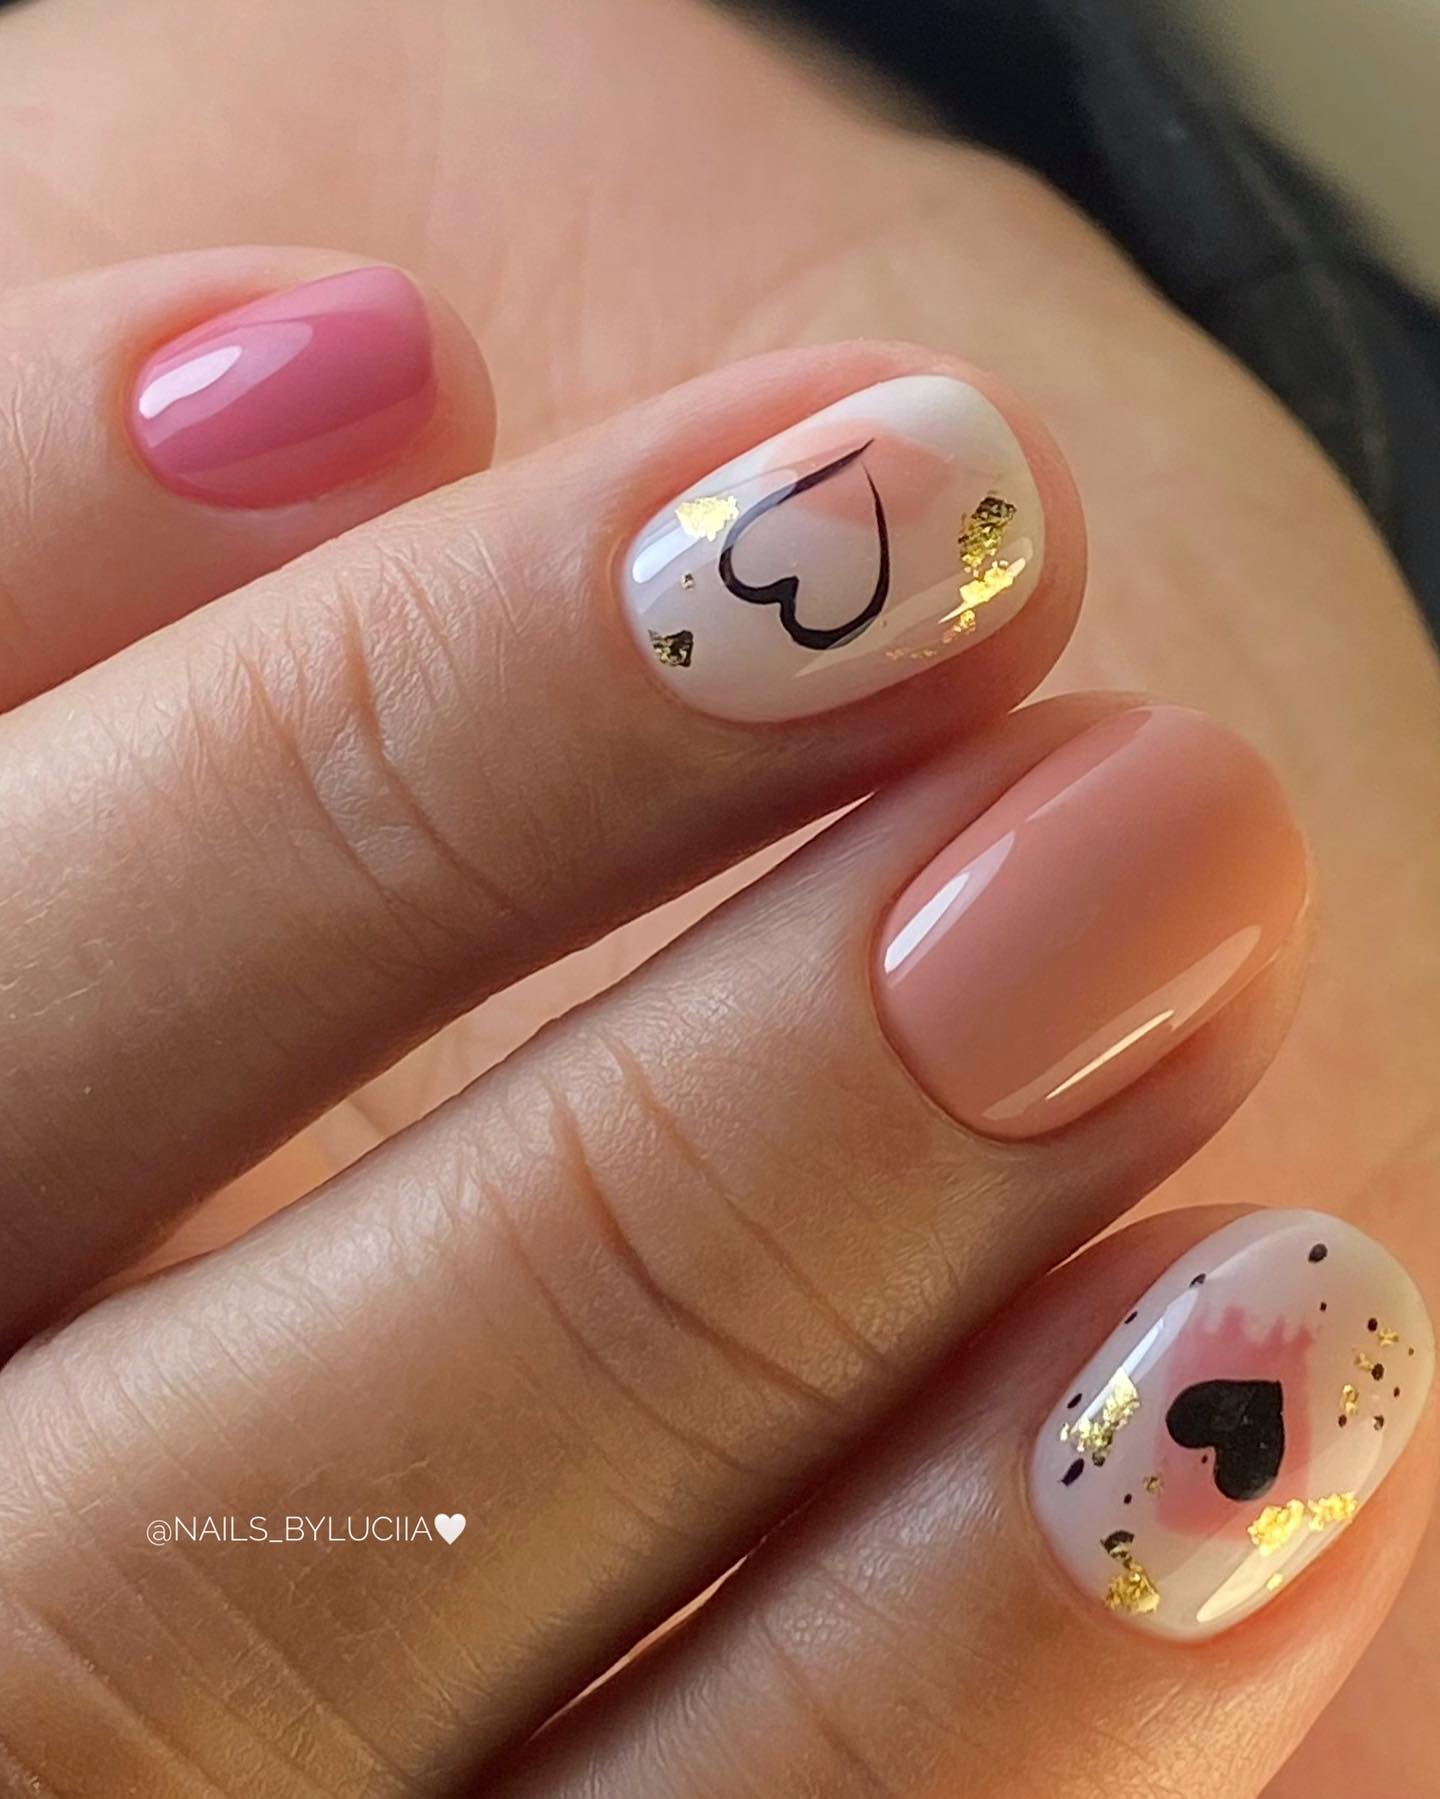 100+ Short Nail Designs You’ll Want To Try This Year images 78